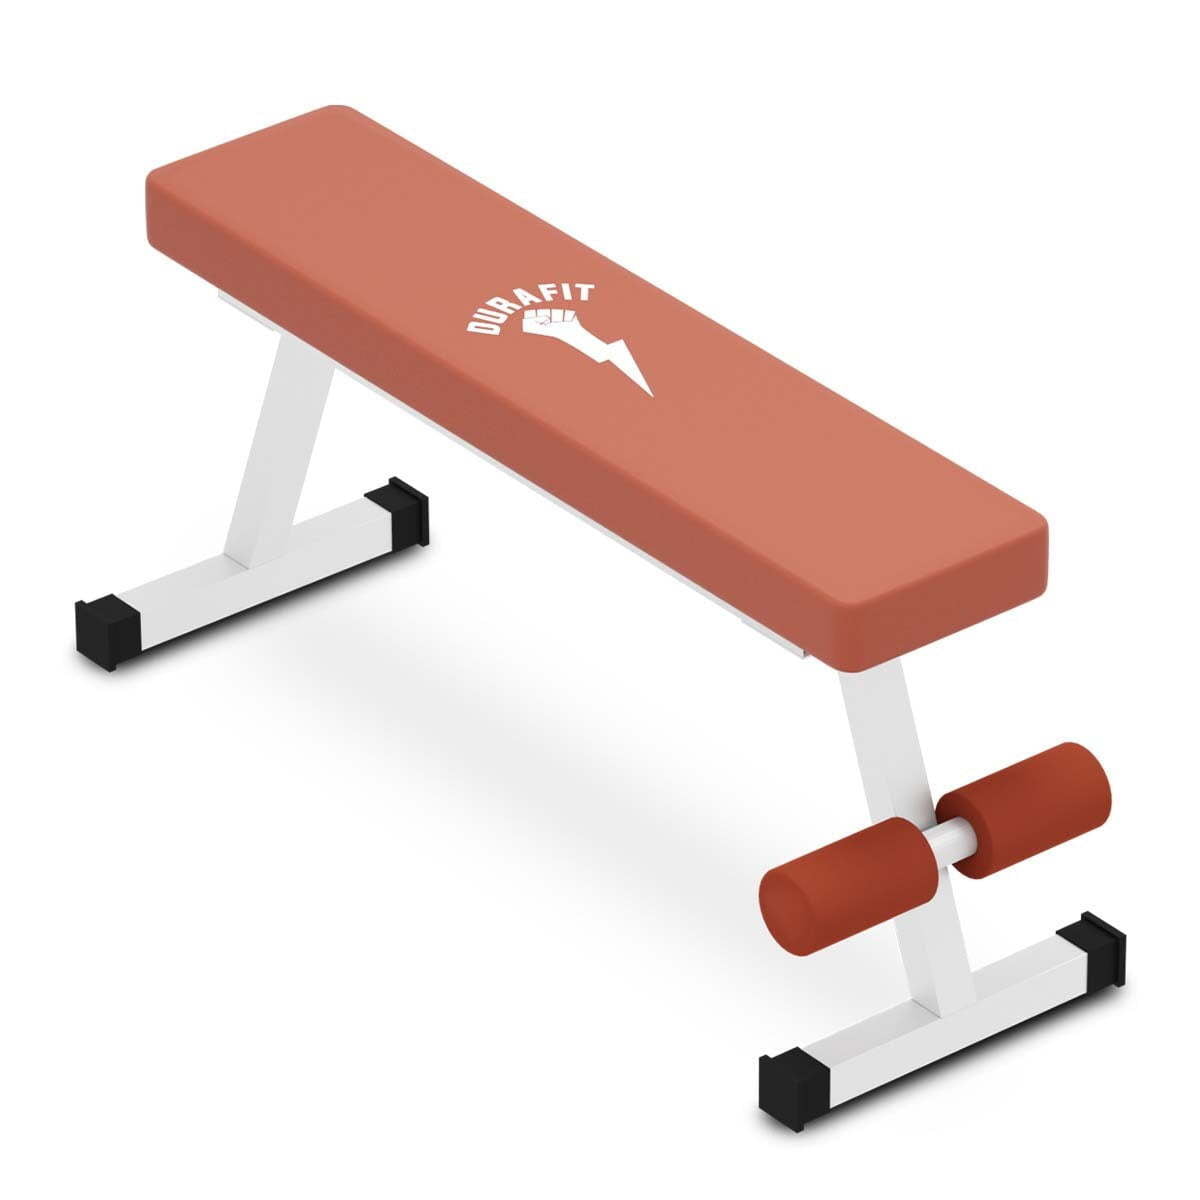 Durafit Simple Flat Bench- Leather